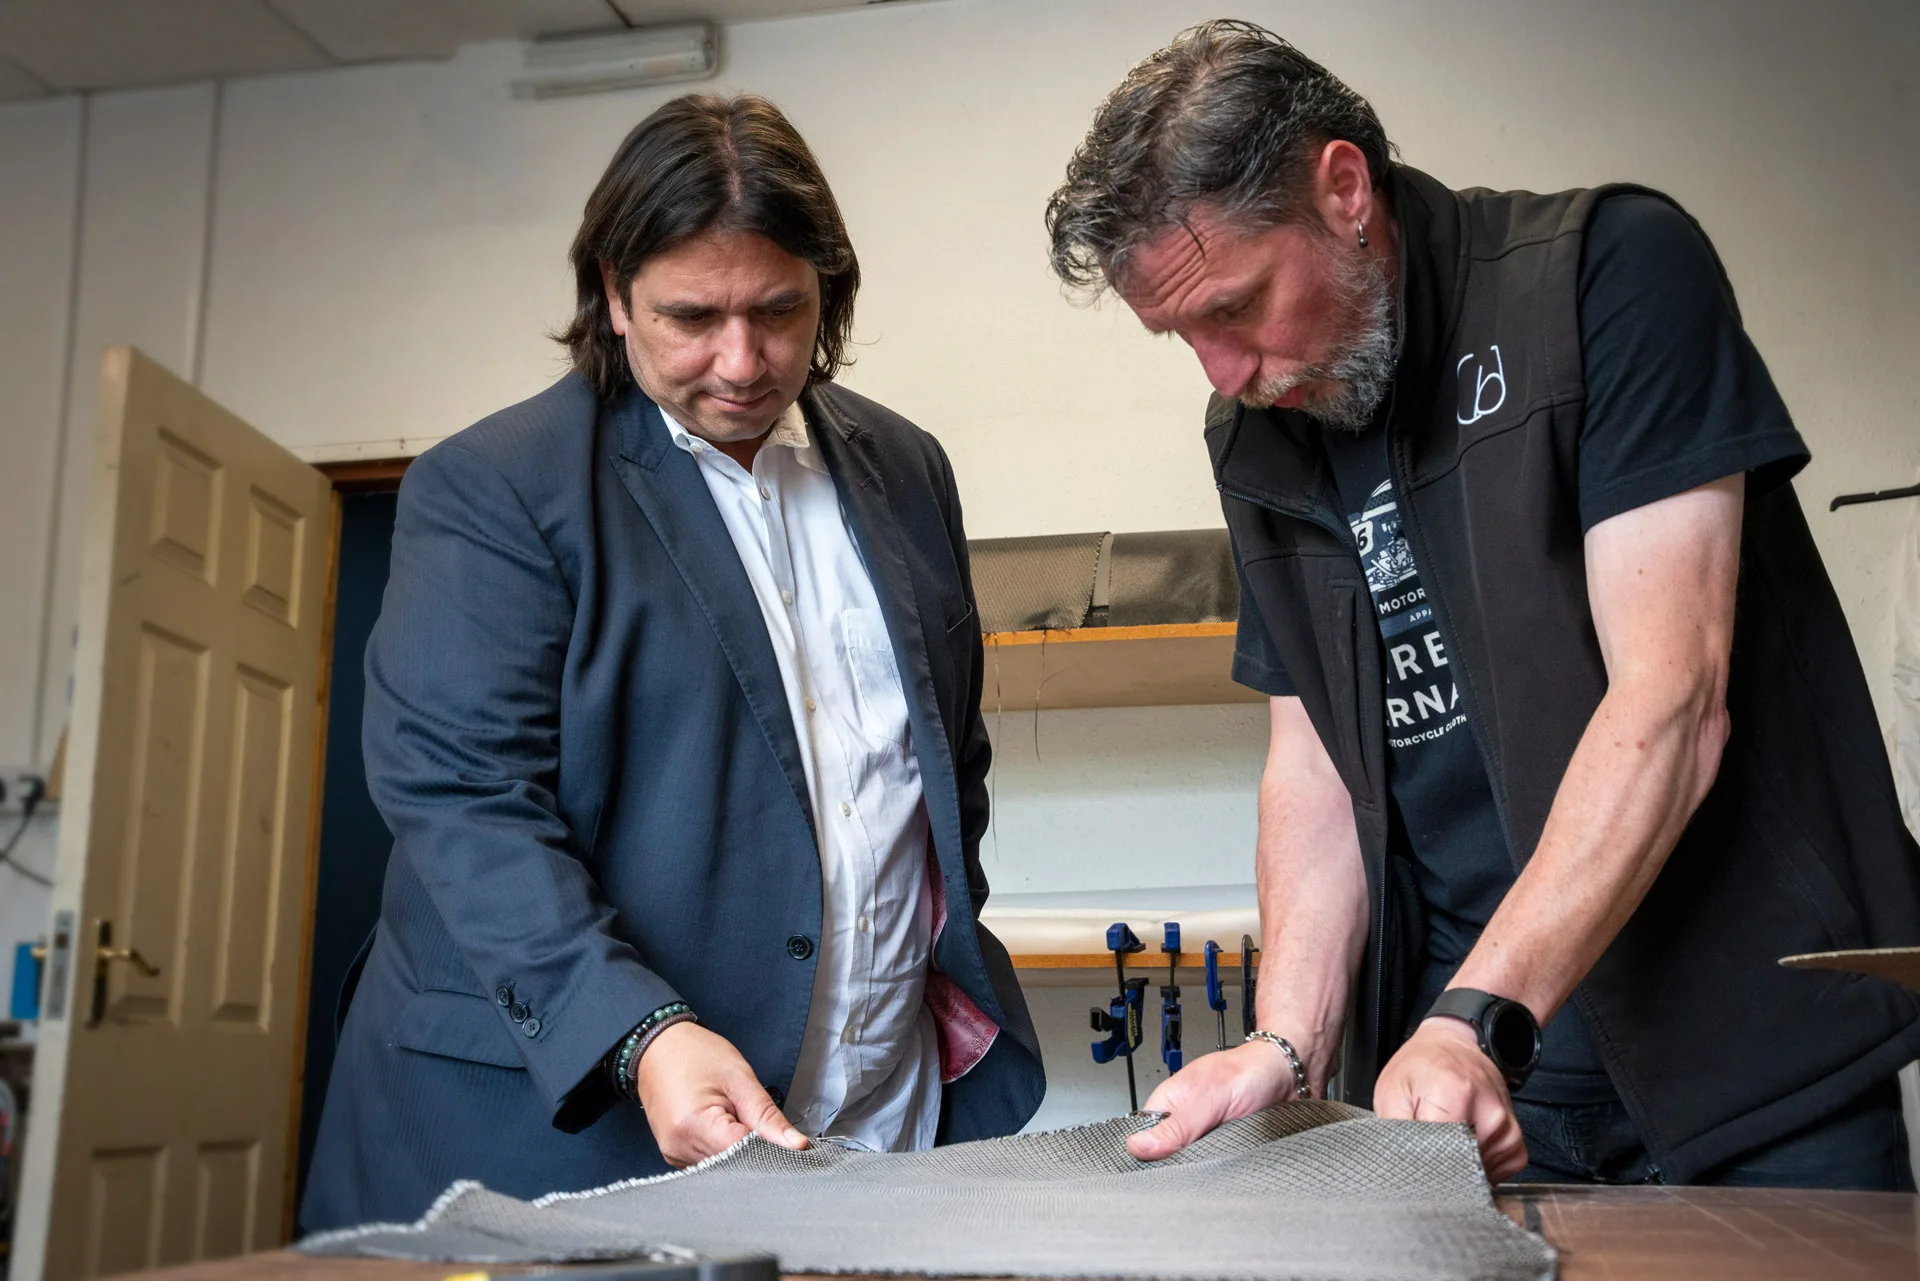 Composites Engineer Darren with George showing the unique carbon-PTFE fabric that Wilson Benesch developed specially and has woven exclusively for the company to allow the IGx and various other carbon composite components to be created in house at Wilson Benesch